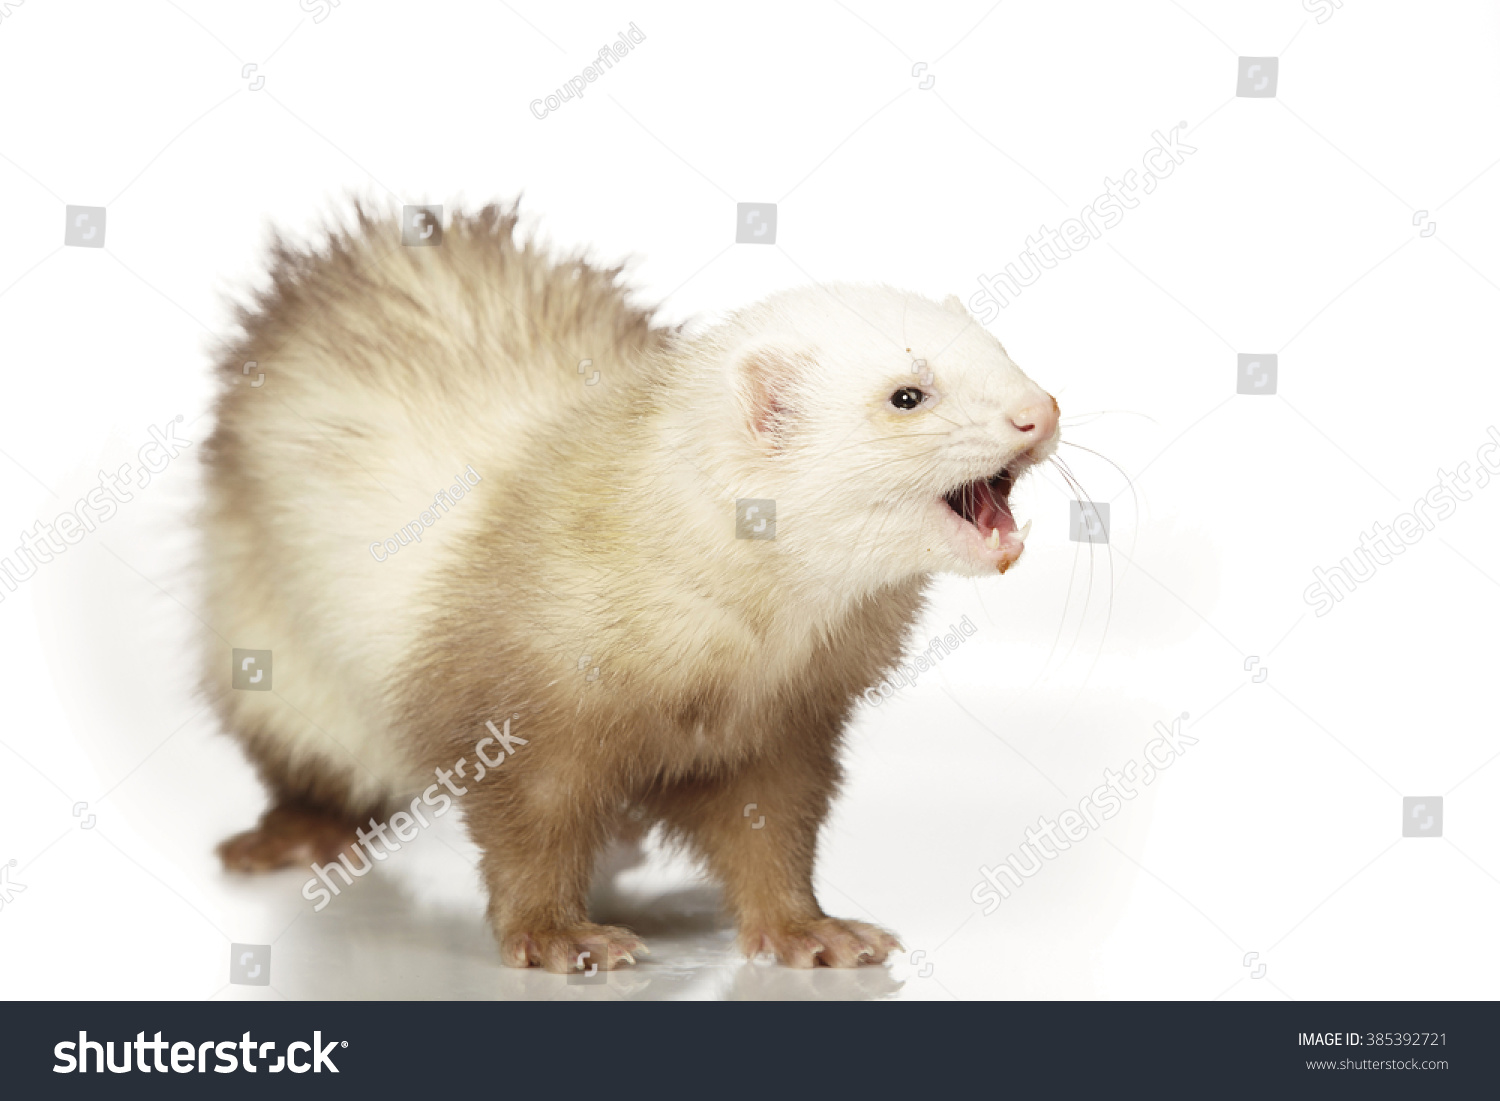 Chocolate Color Ferret Male On White Stock Photo Edit Now 385392721